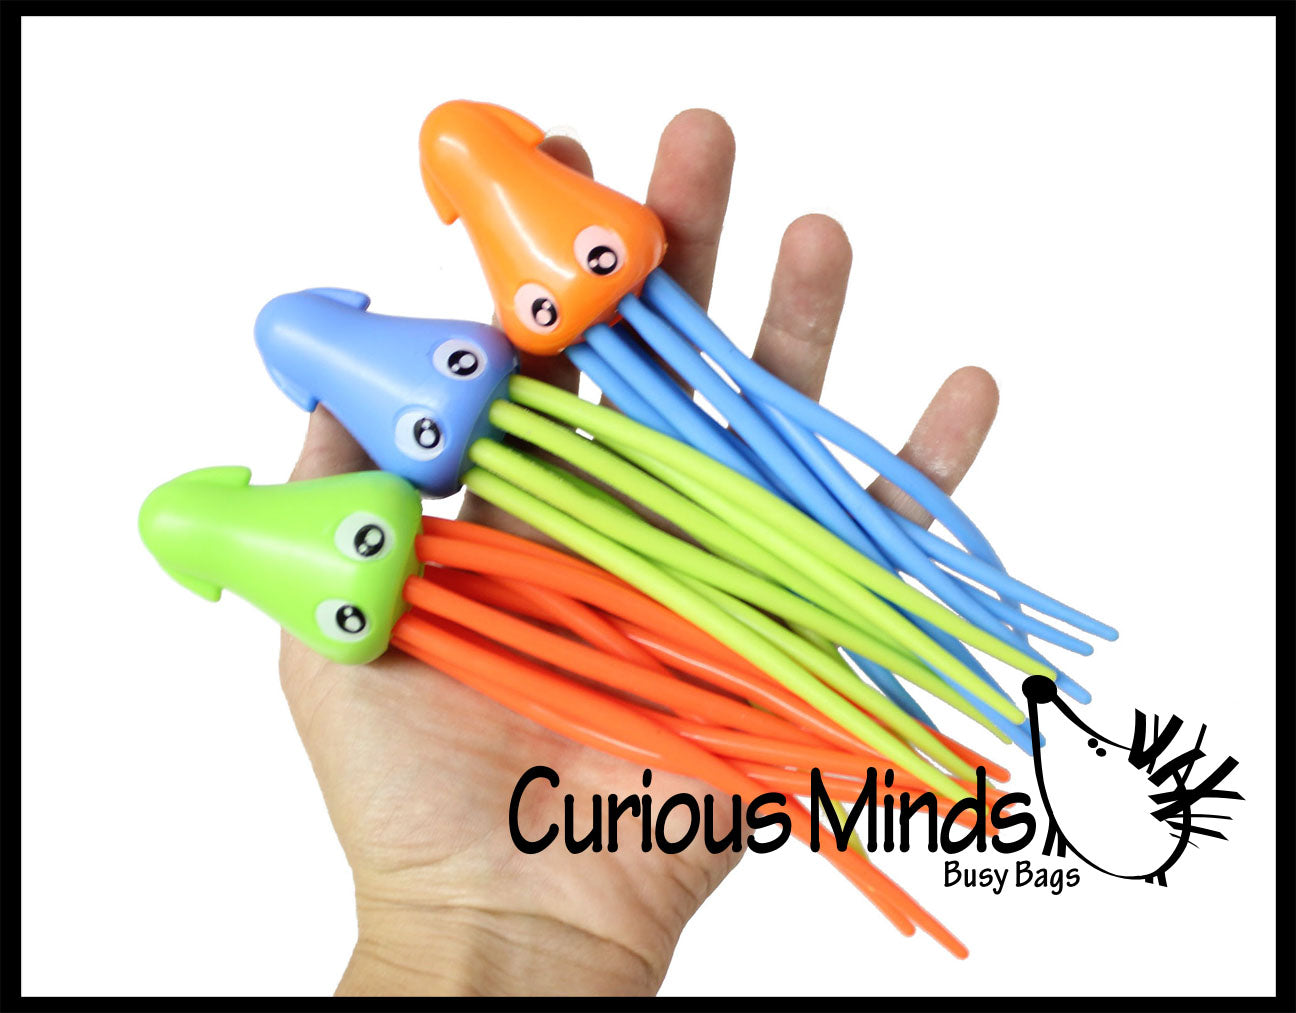 Squid/Octopus/Jellyfish Pool Dive Sticks - Pool, Beach and Bath Toy Dives